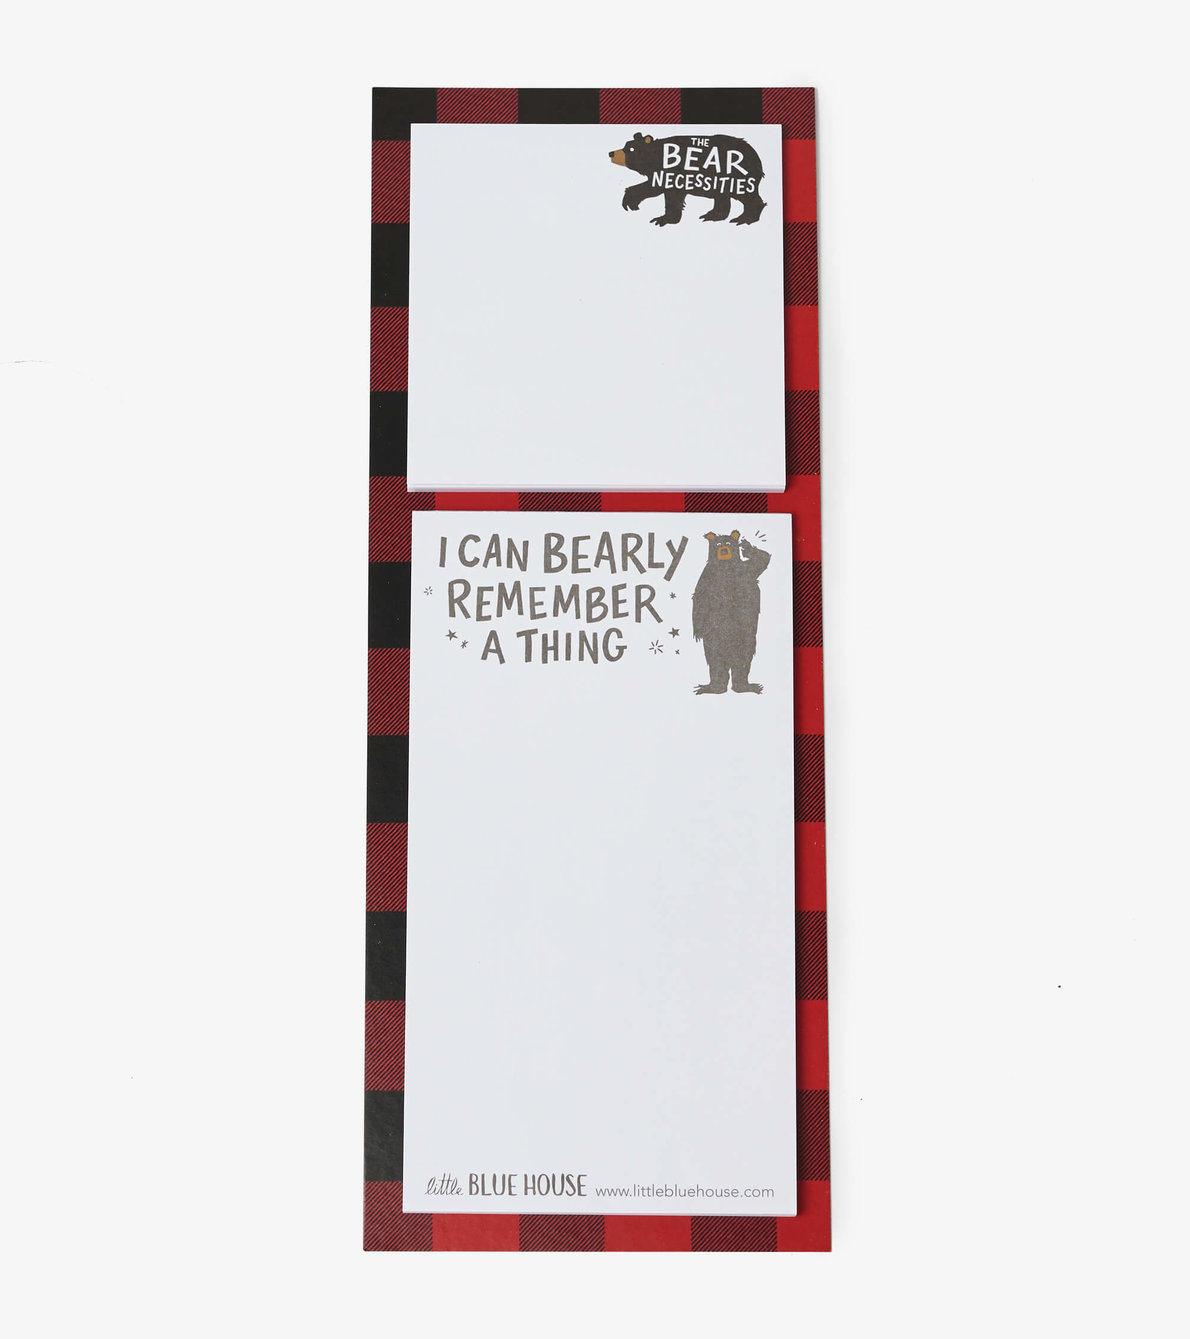 View larger image of Bear Necessities Sticky Notes & Magnetic List